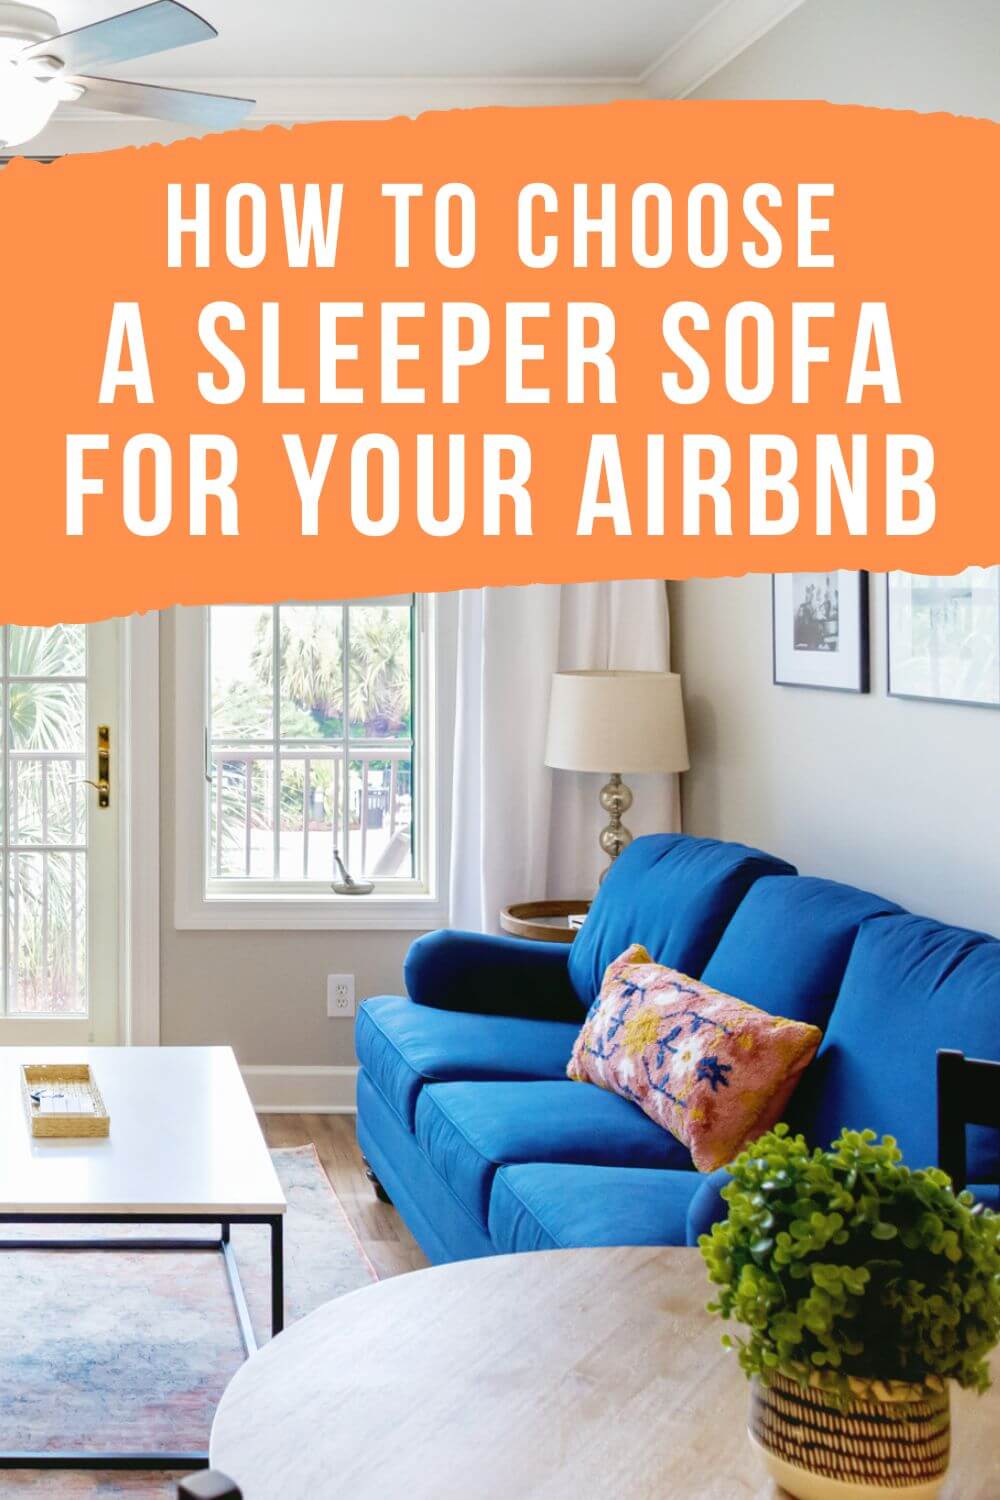 Airbnb Sofa Bed Options with Good Reviews